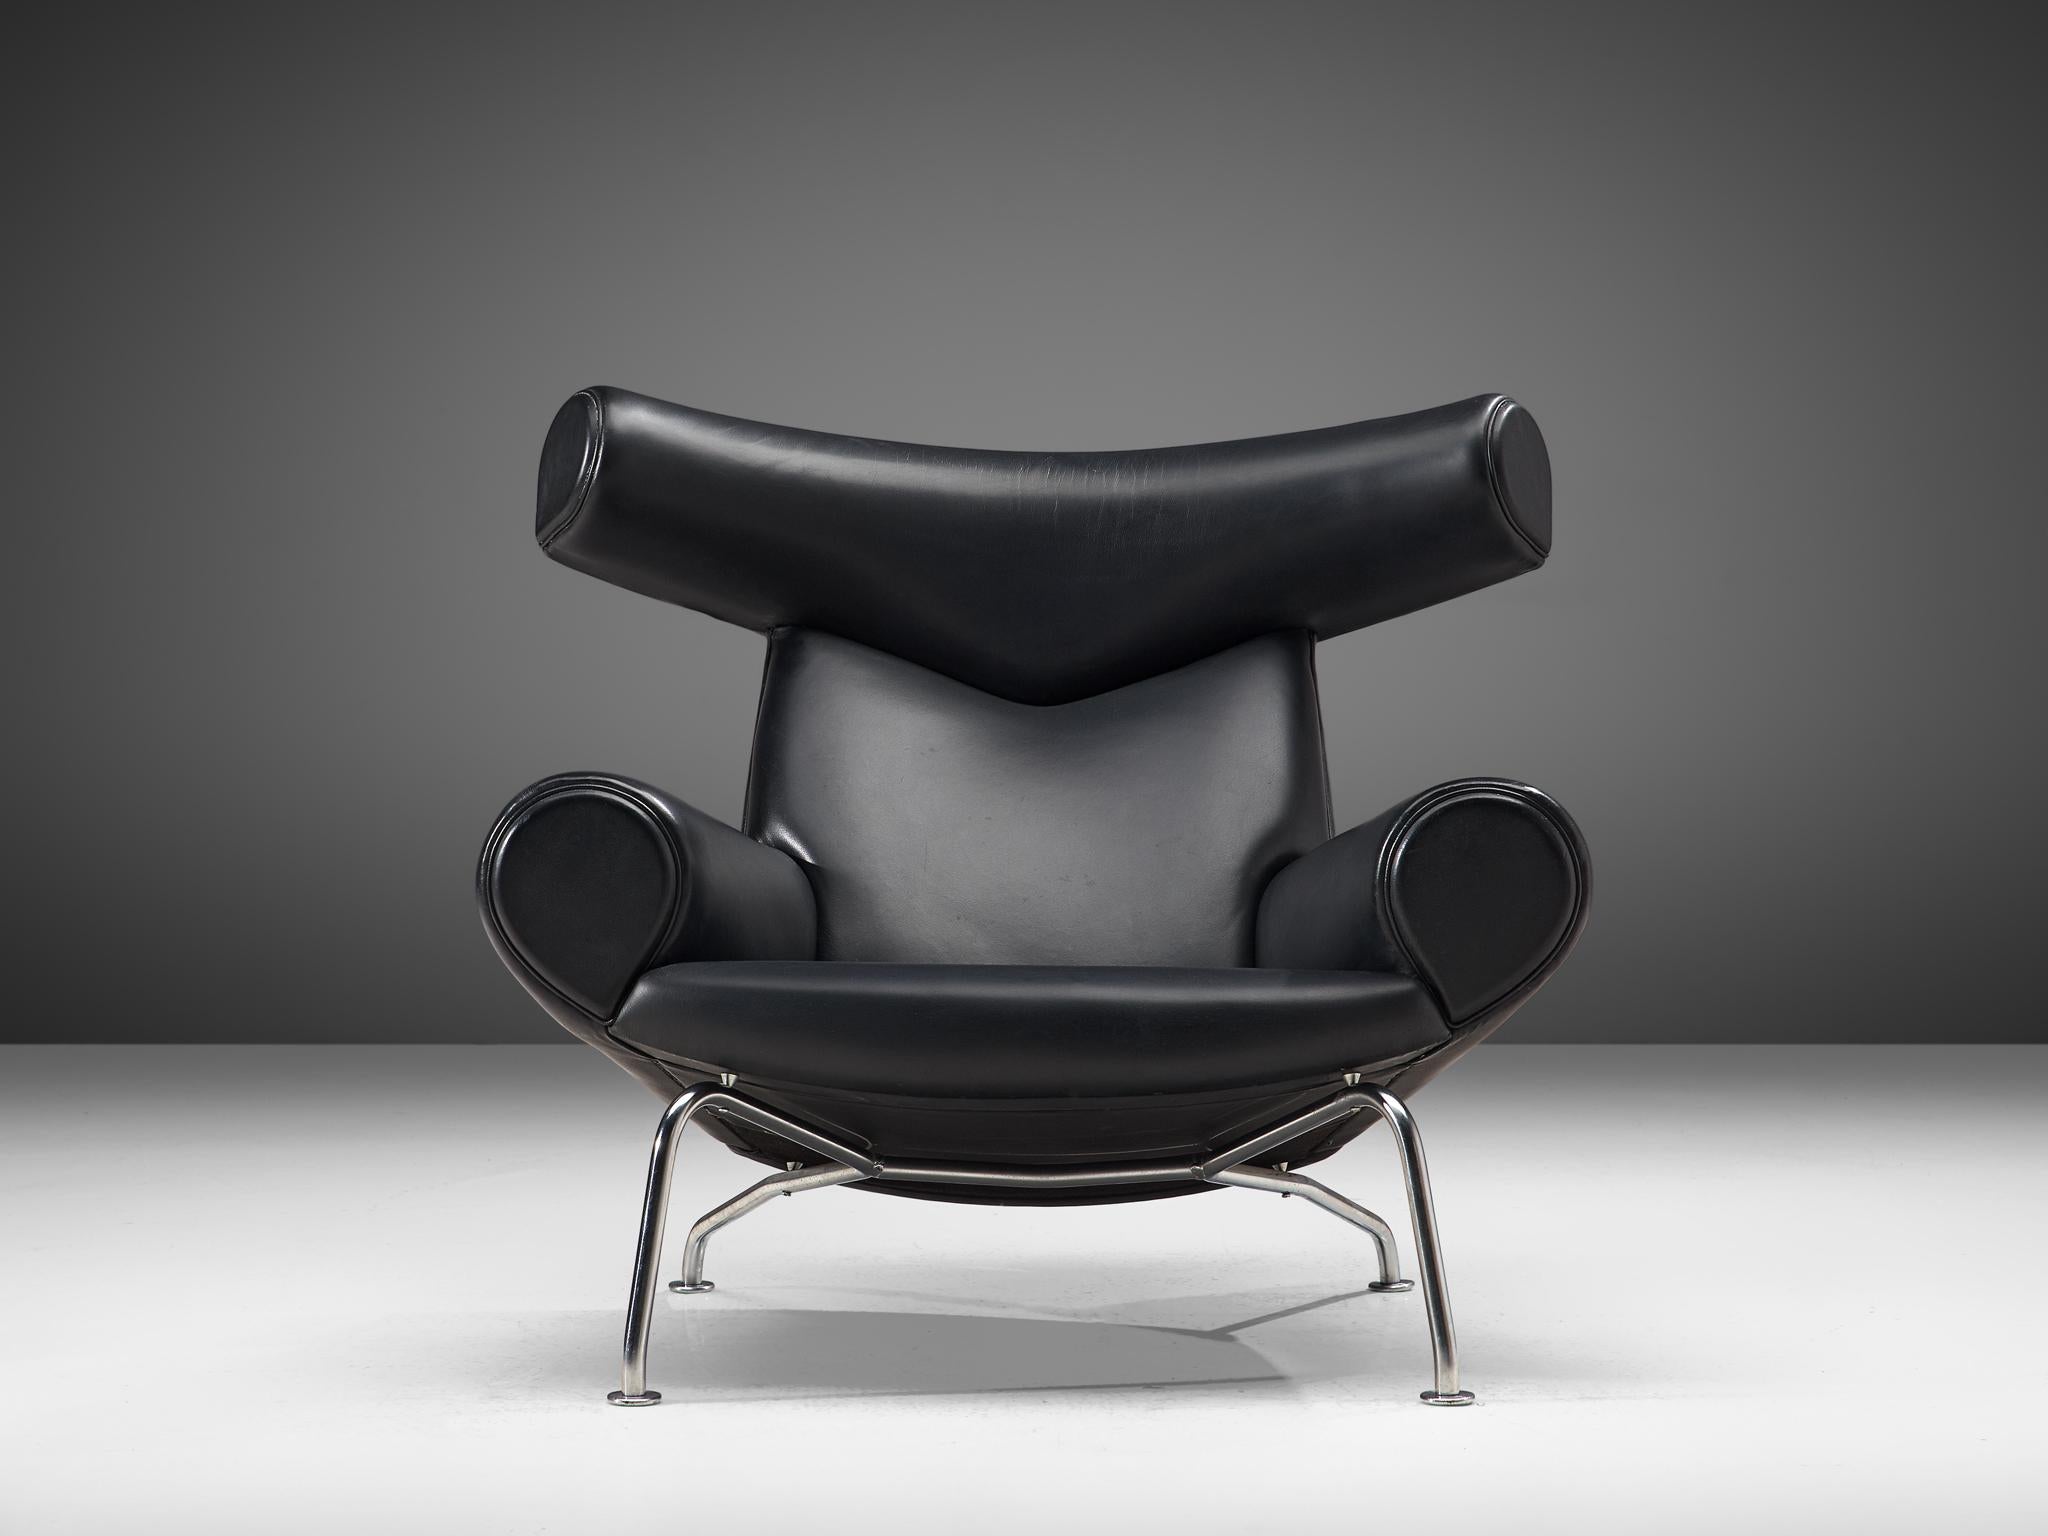 Hans J. Wegner, OX 'King' lounge chair, leather and metal, Denmark, 1960

The 'AP46' OX-Chair is designed by Hans J. Wegner in 1960. A wonderful piece which was Wegner's favorite chair at home. The chair is also known by the name 'King Chair', and